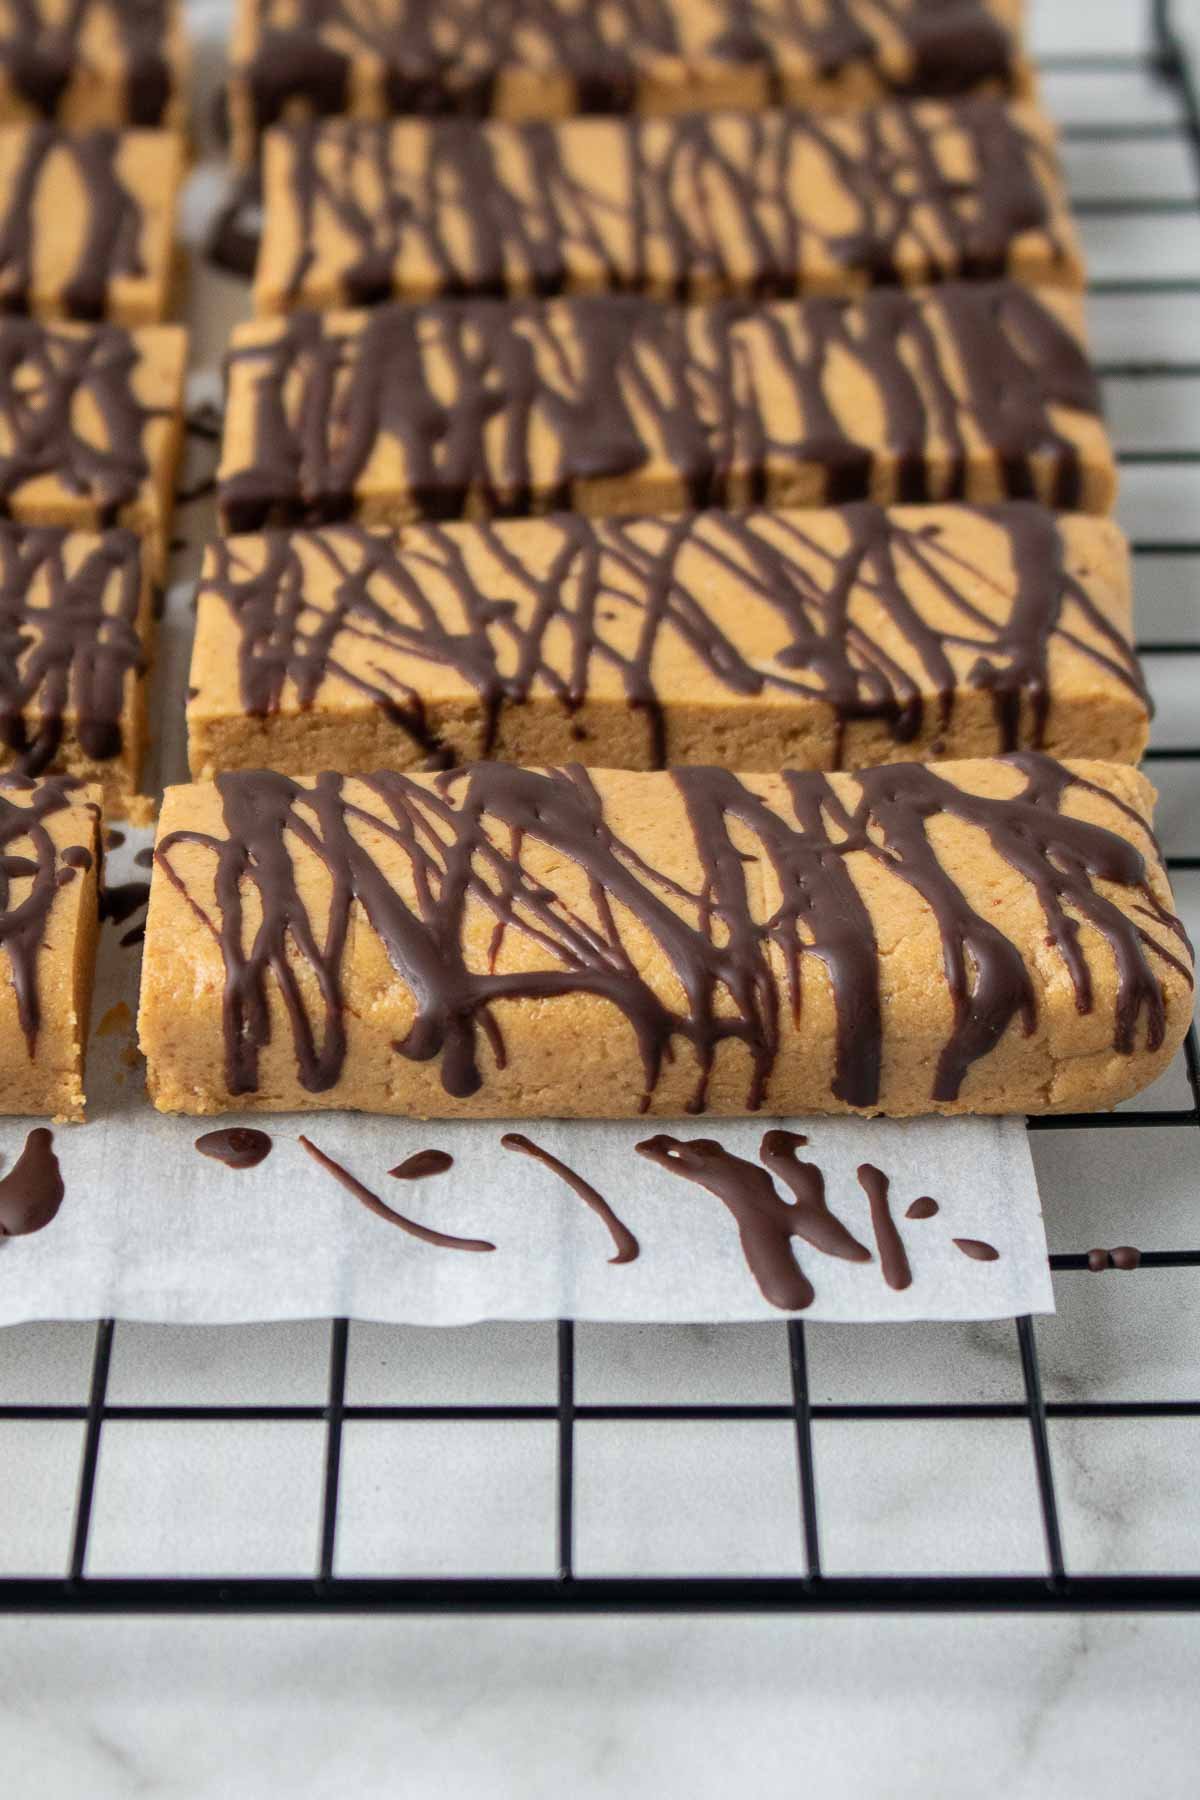 Protein bars on a baking rack with chocolate drizzled on top.